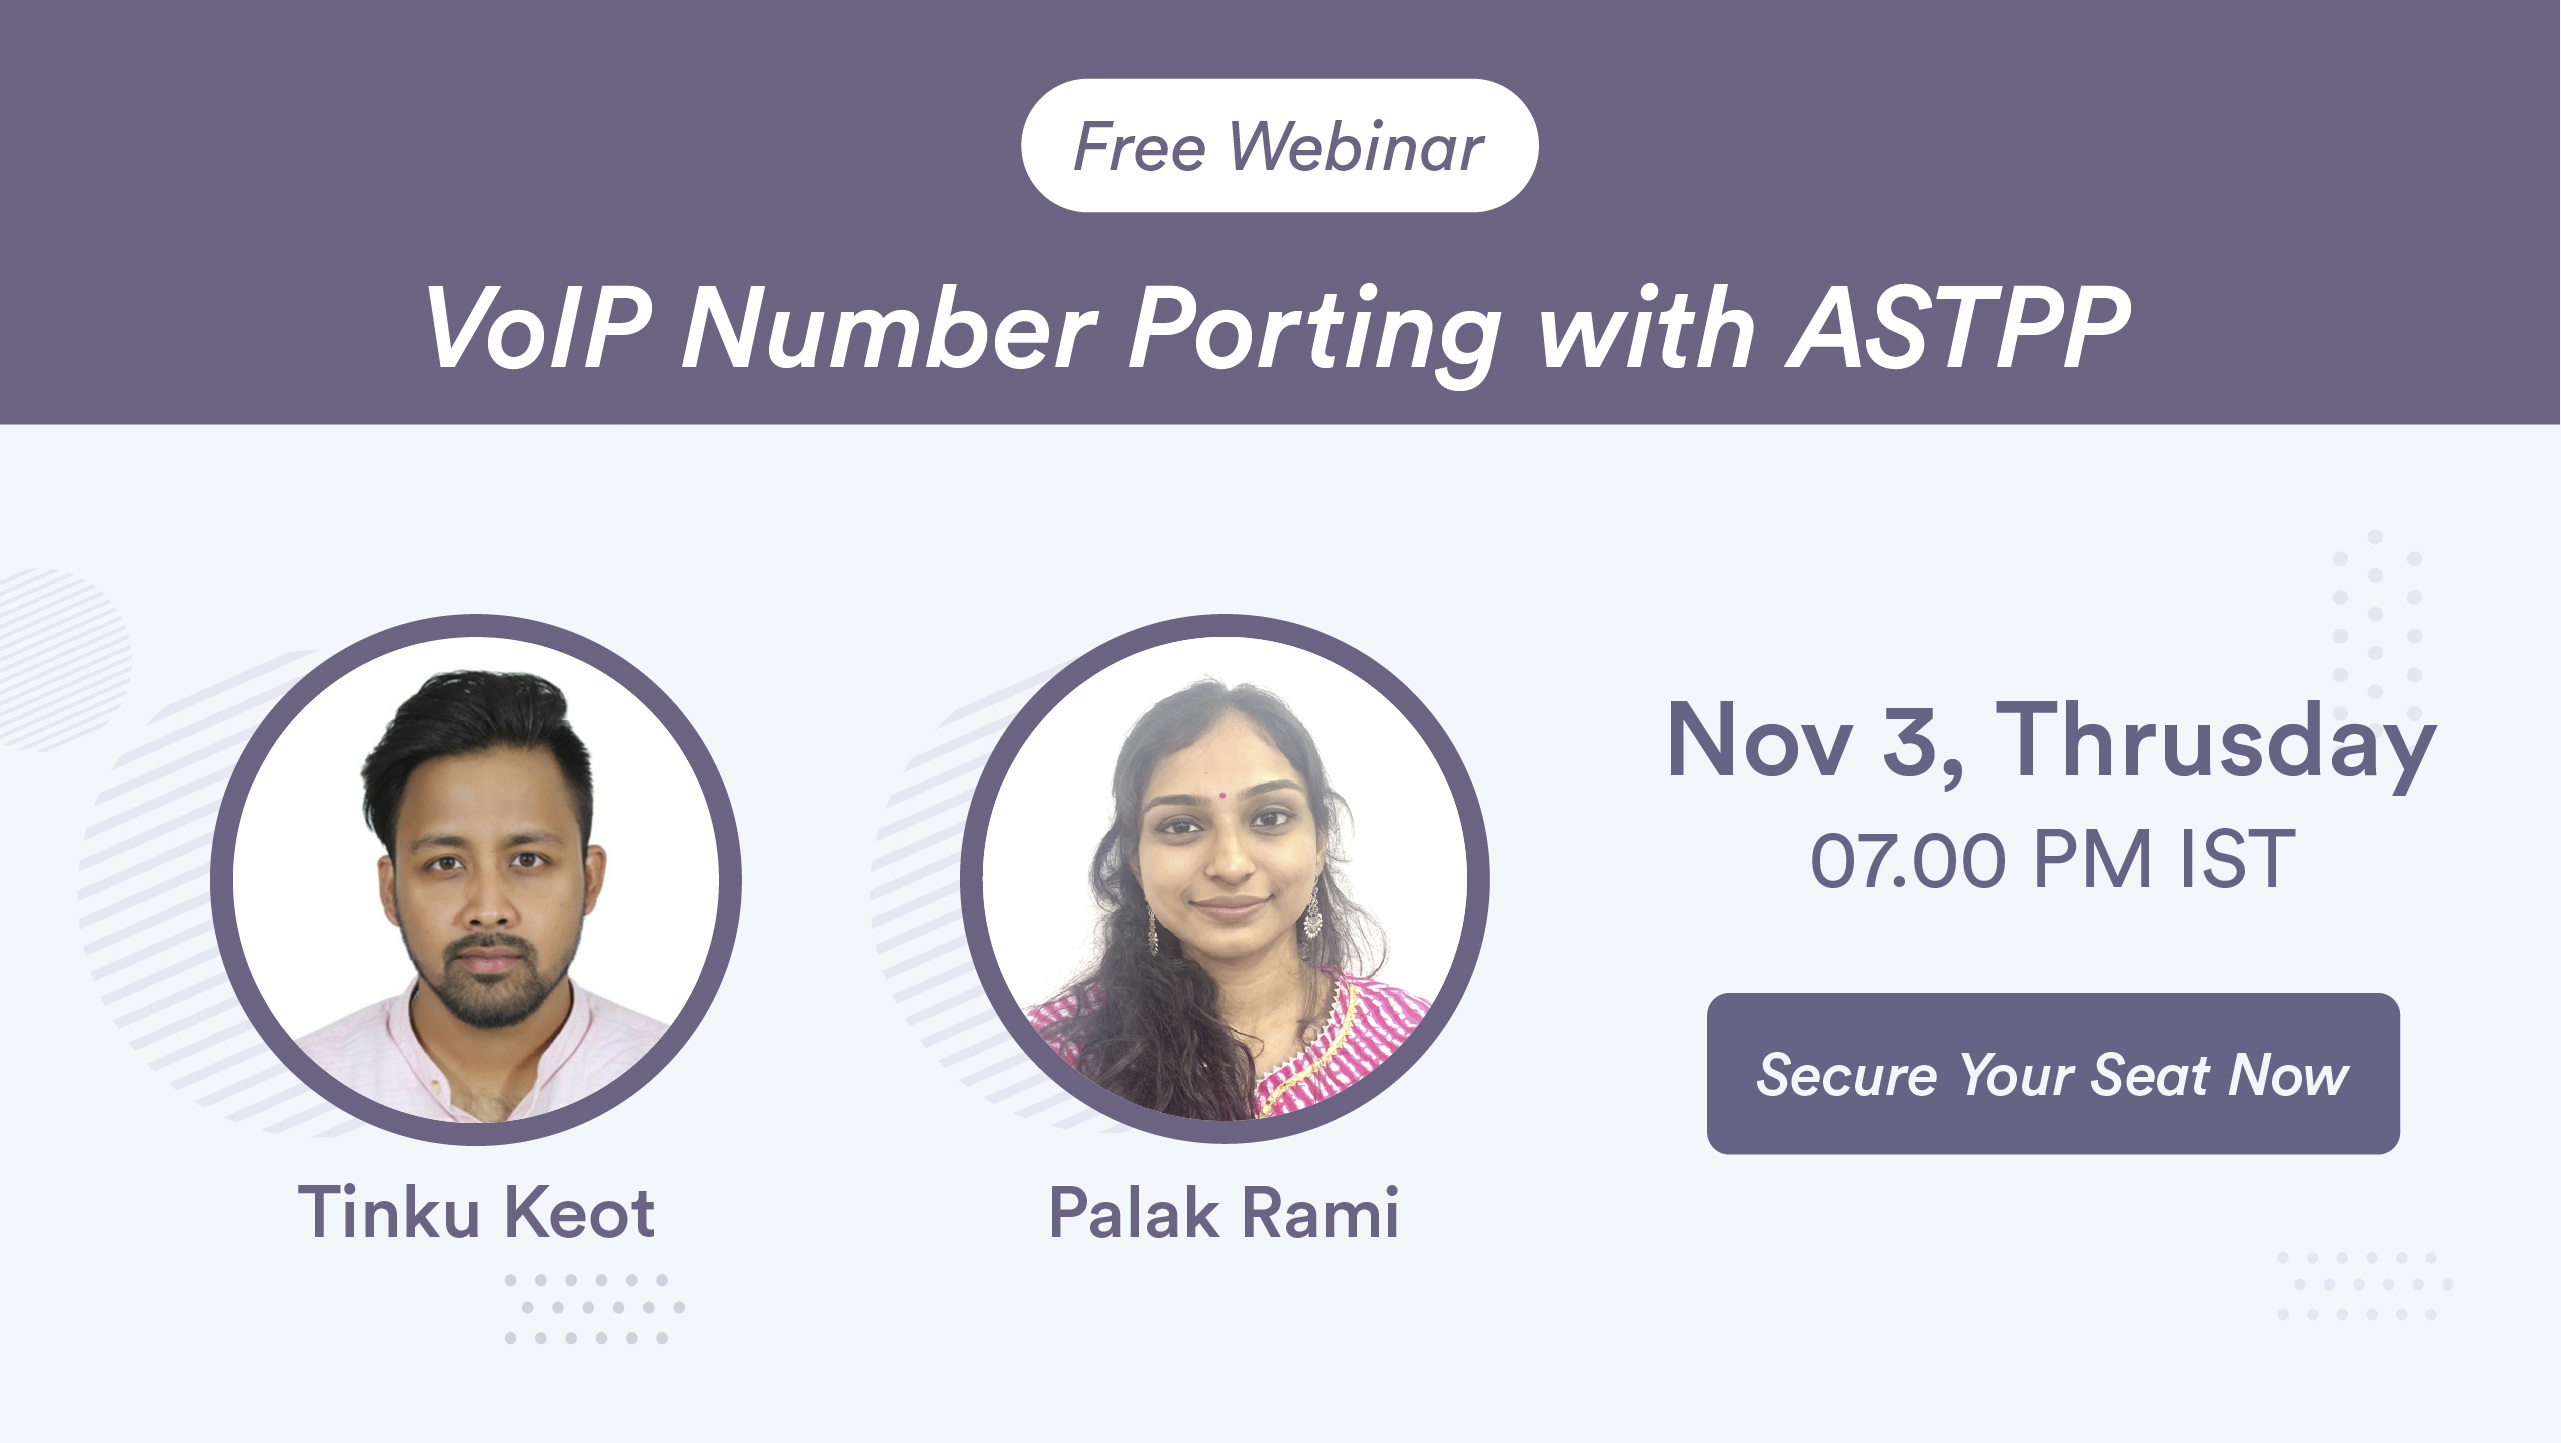 VoIP Number Porting with ASTPP